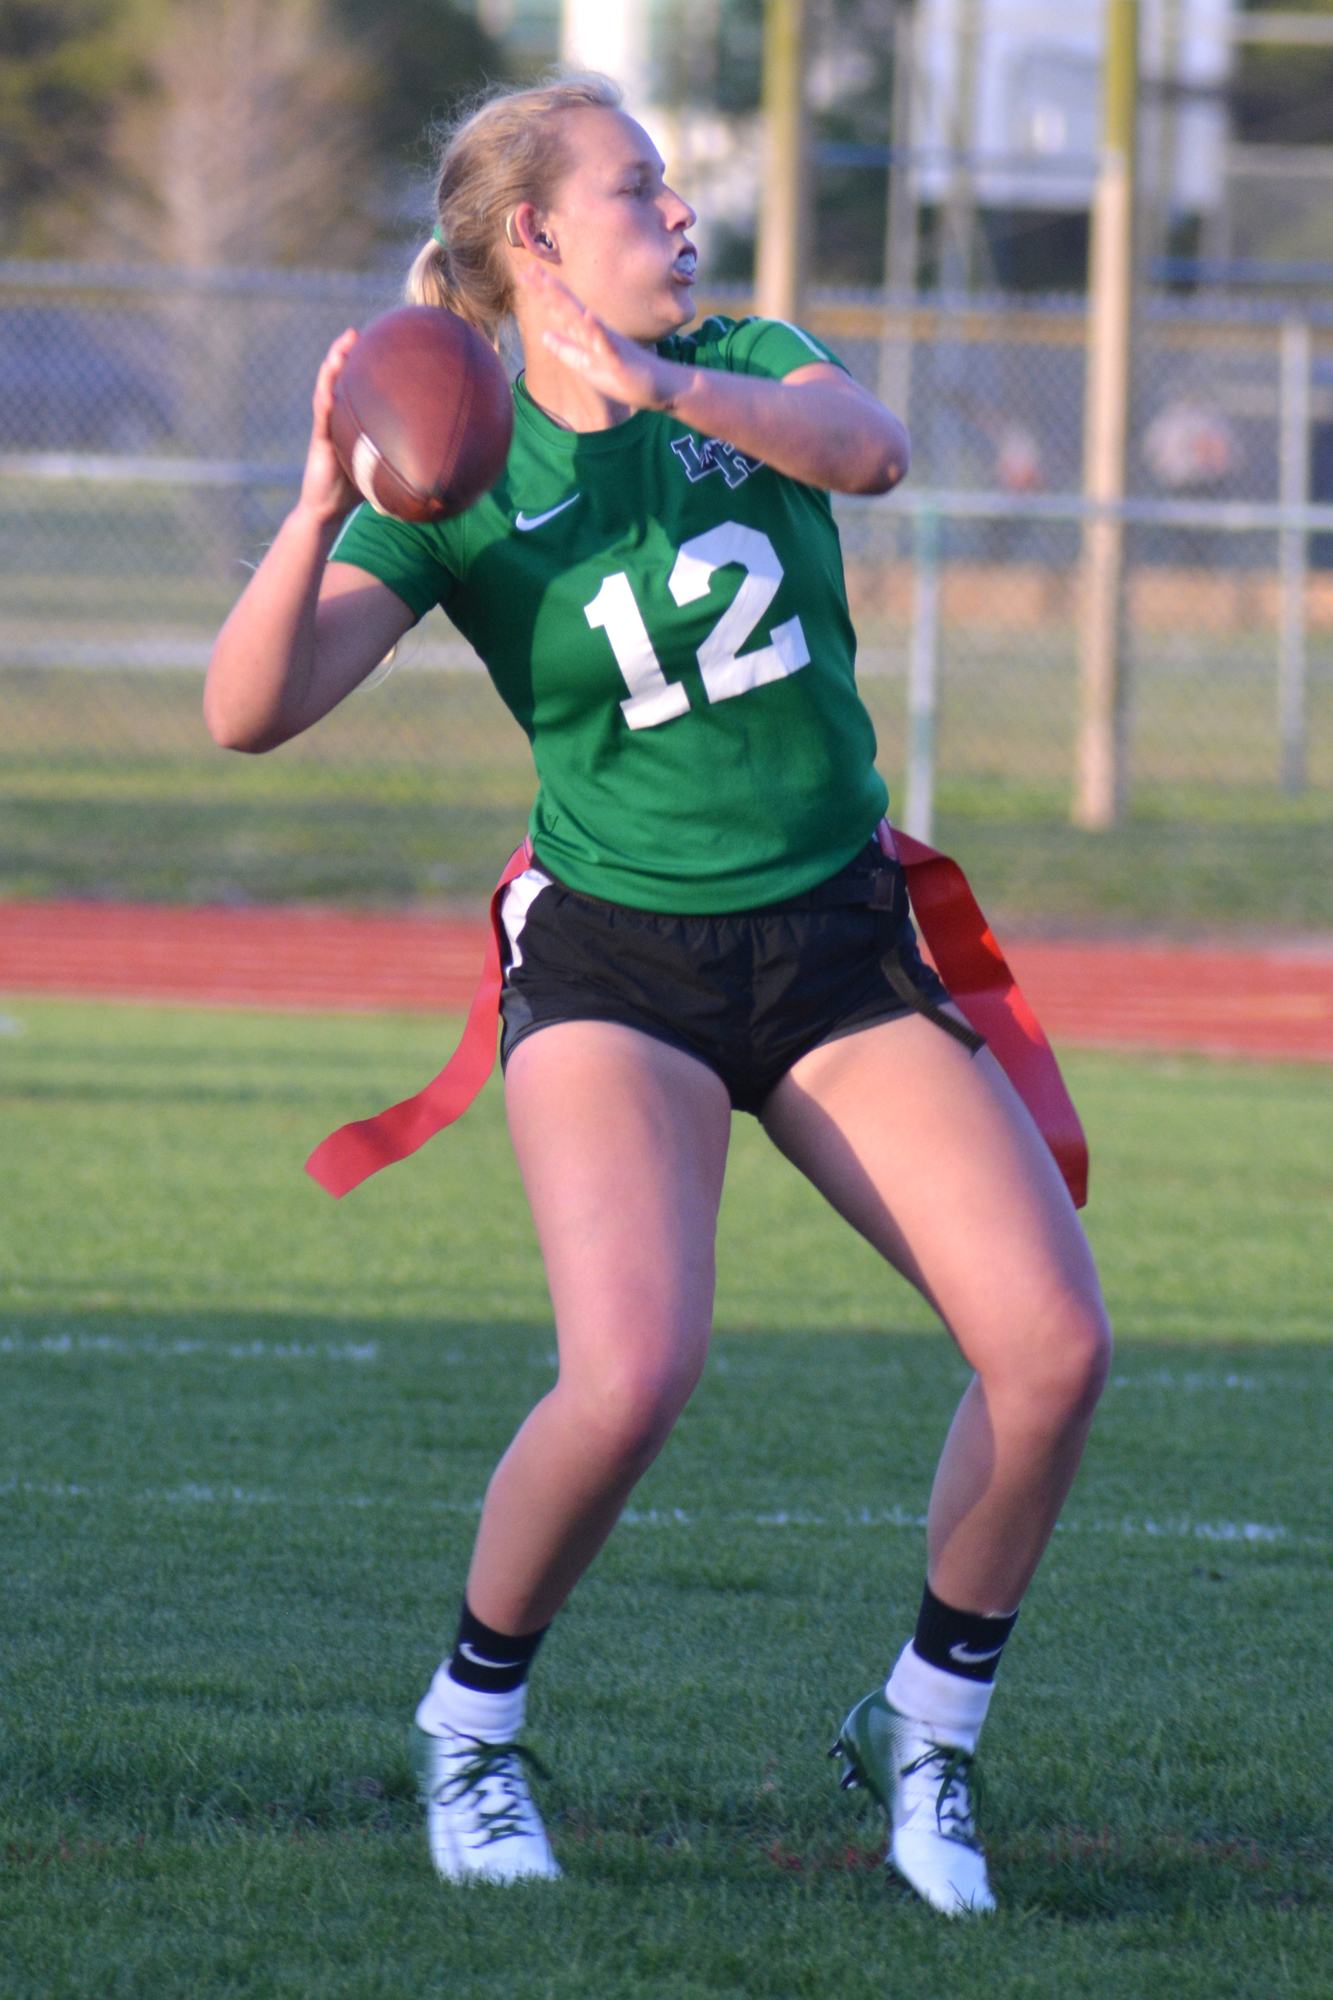 Former Lakewood Ranch High flag football quarterback Spencer Mauk drops back to pass. The Premier Flag Football League would prepare girls for the high school level.